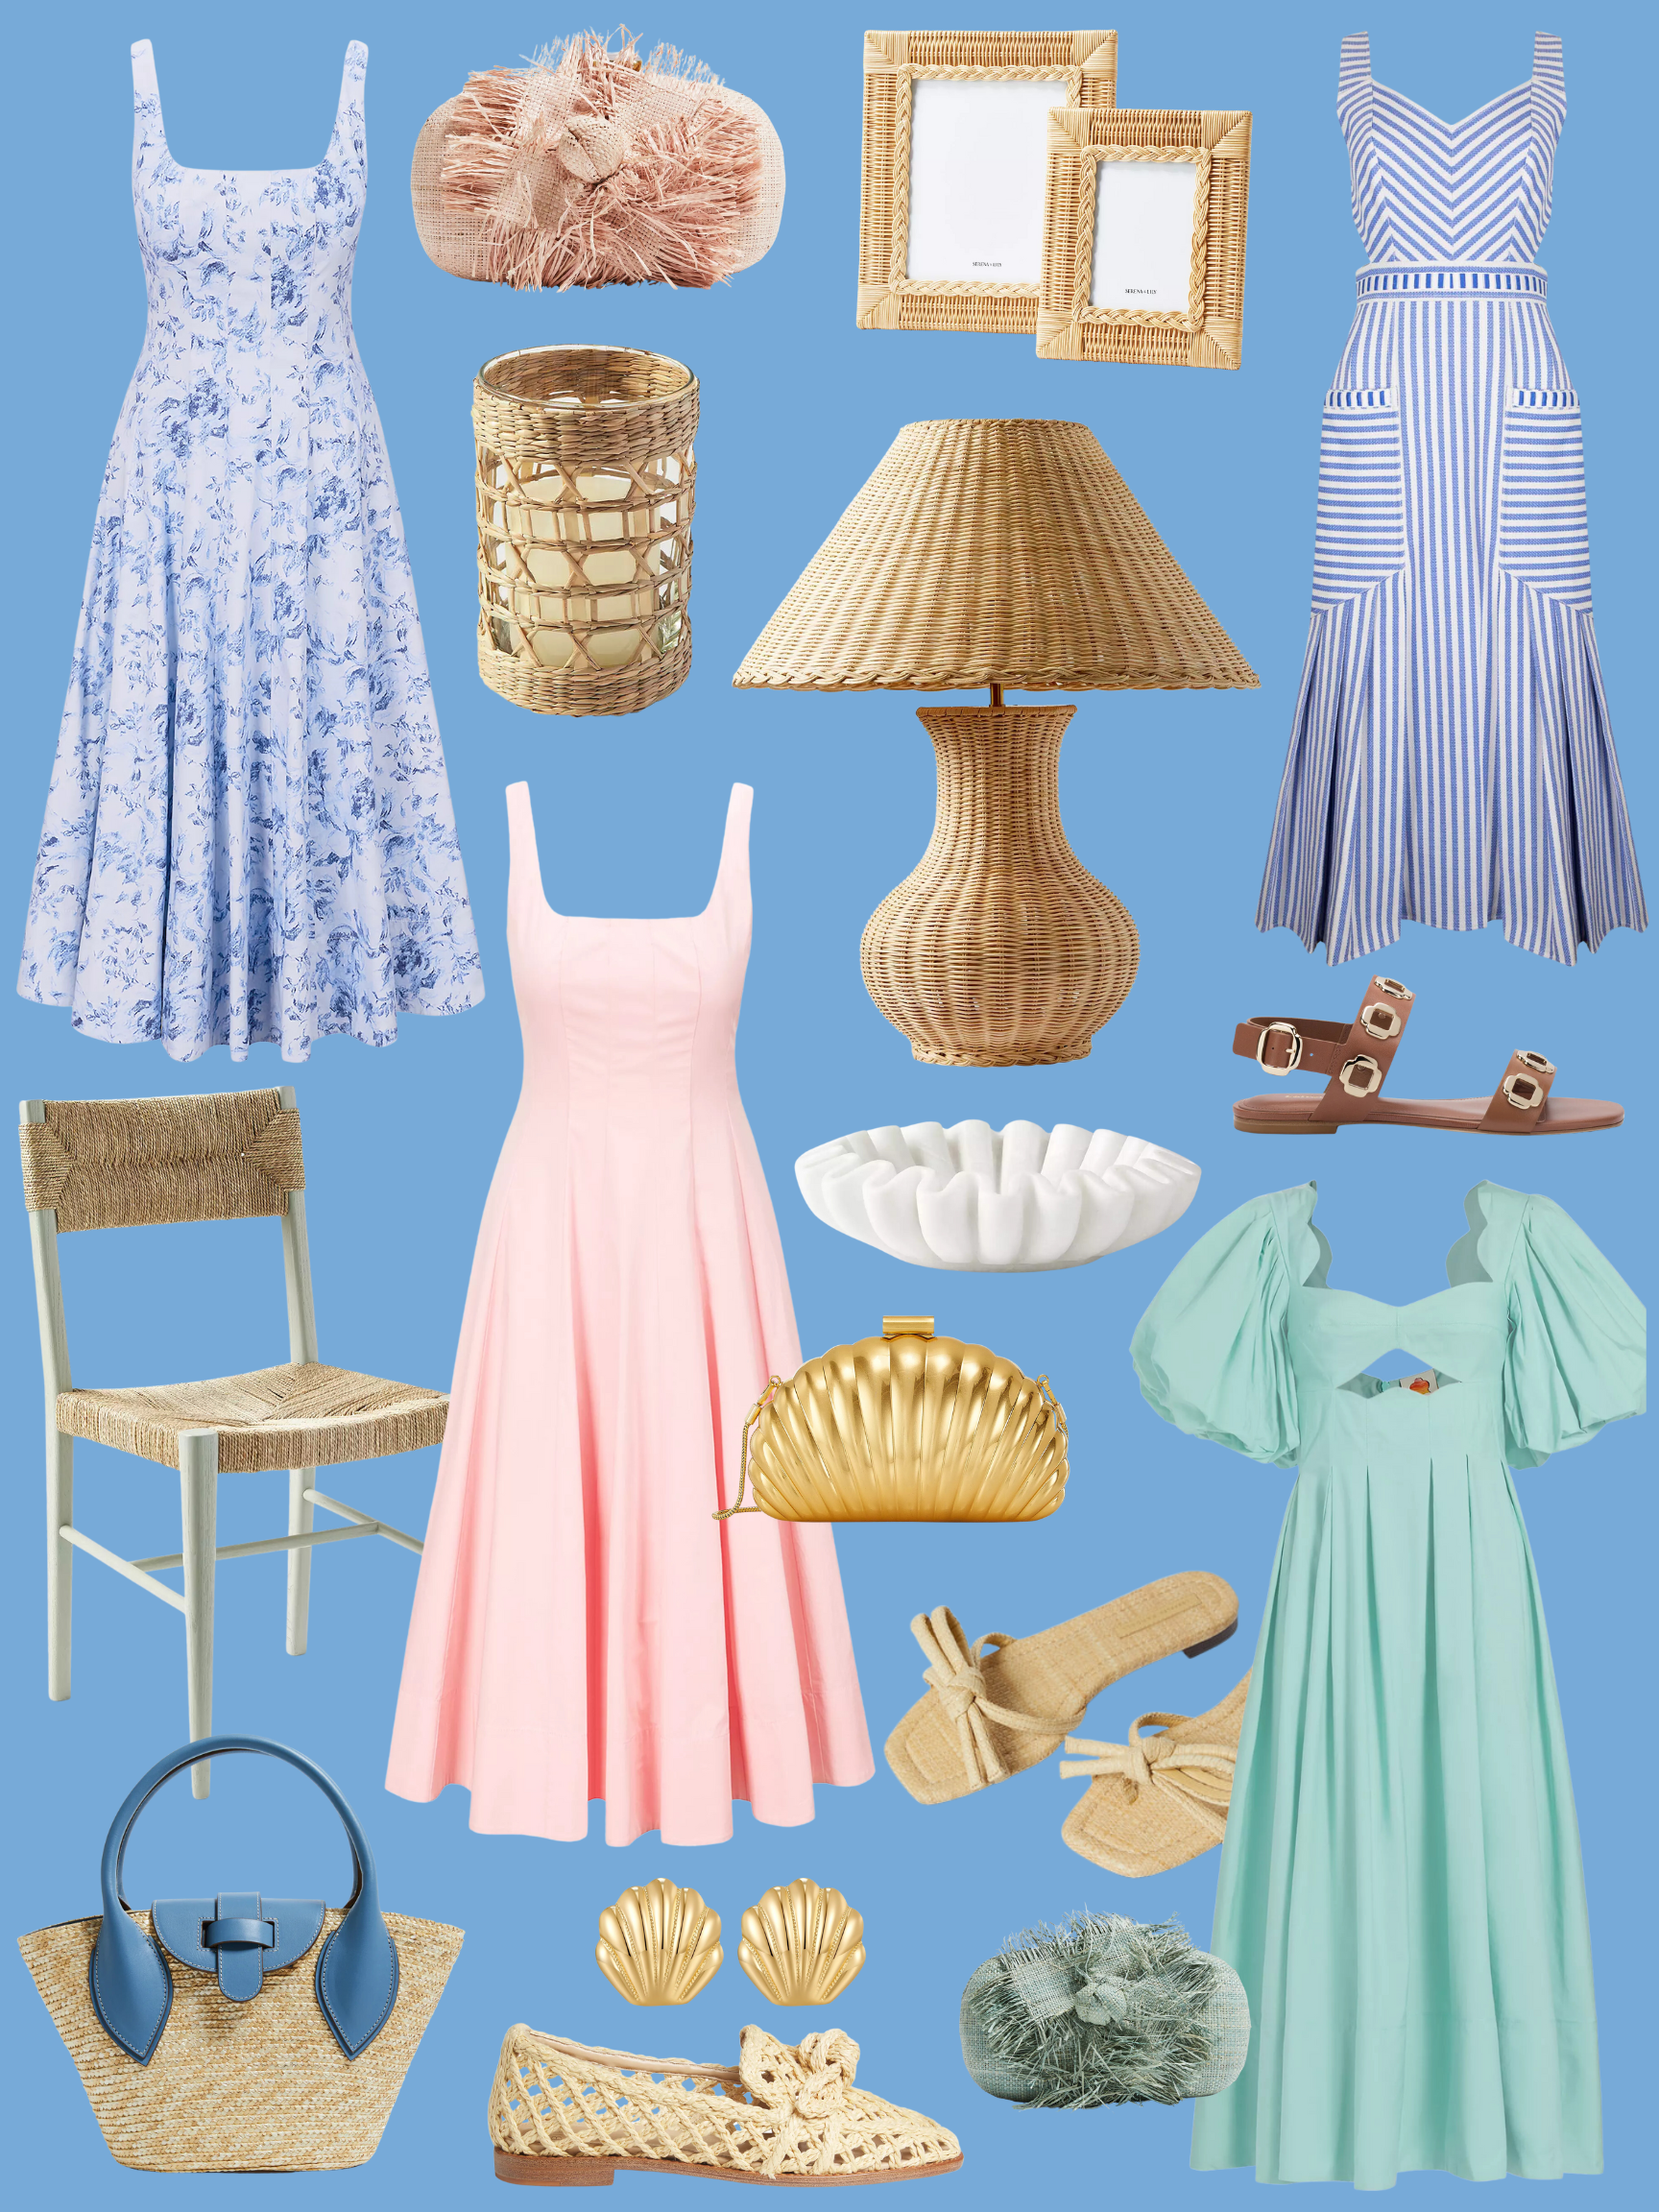 Desiree Leone of Beautifully Seaside shares an all new, Looks I Love, featuring new spring and resort wear styles.